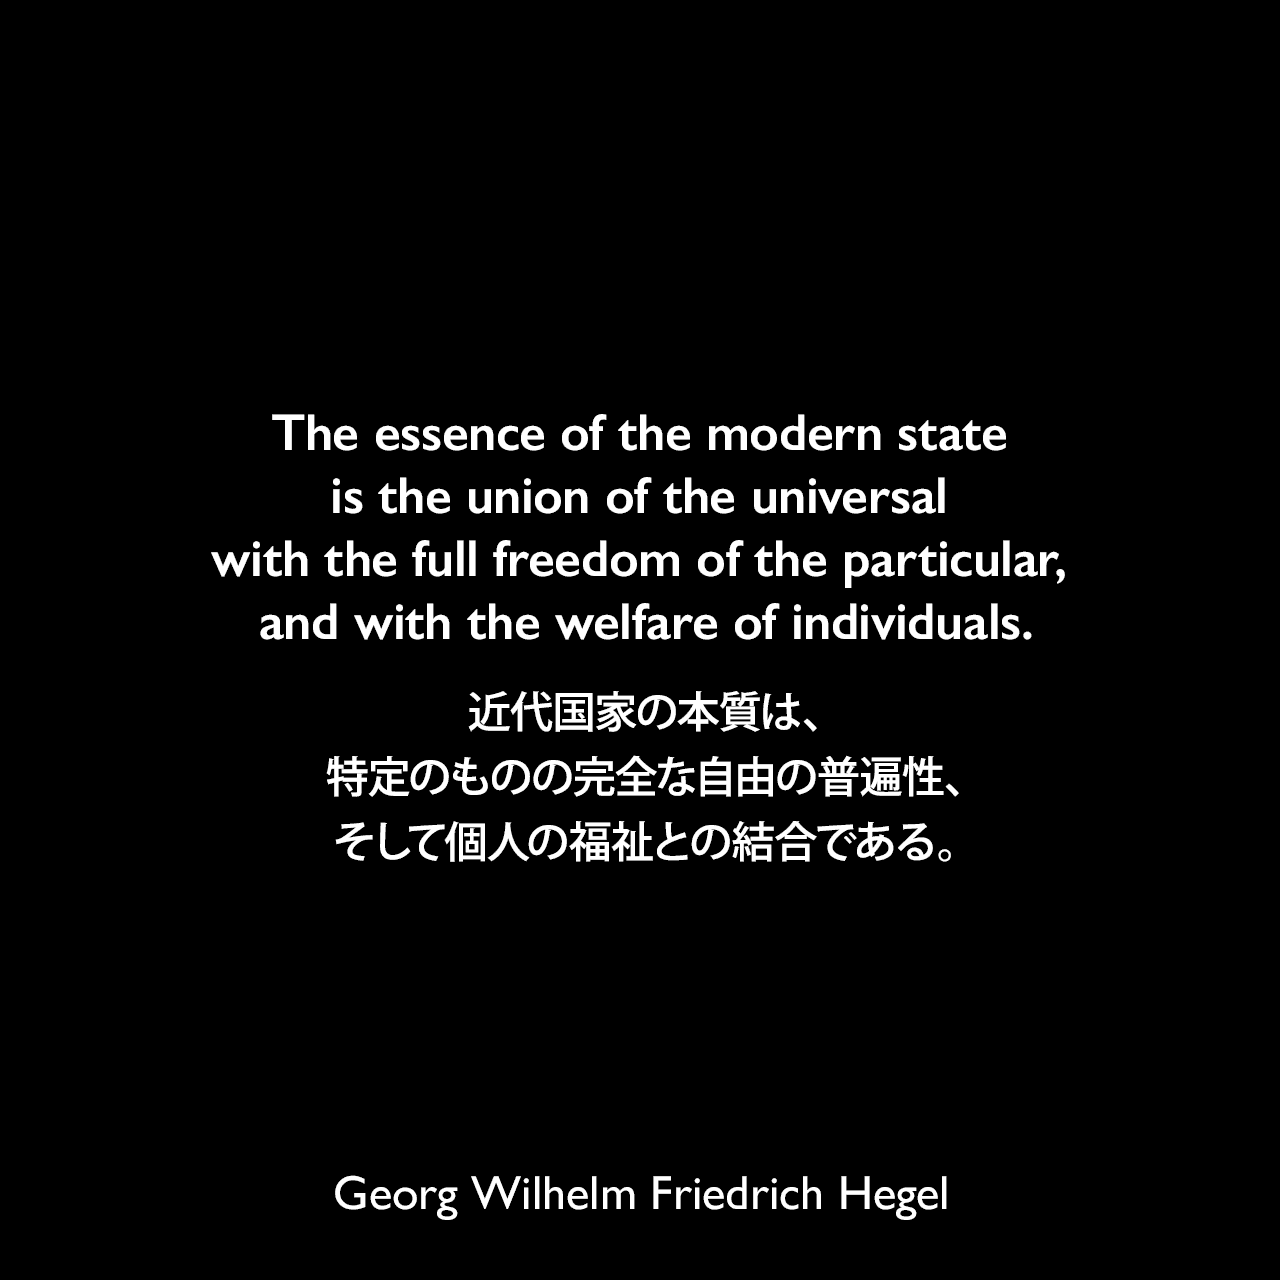 The essence of the modern state is the union of the universal with the full freedom of the particular, and with the welfare of individuals.近代国家の本質は、特定のものの完全な自由の普遍性、そして個人の福祉との結合である。- ヘーゲルによる本「法の哲学」よりGeorg Wilhelm Friedrich Hegel